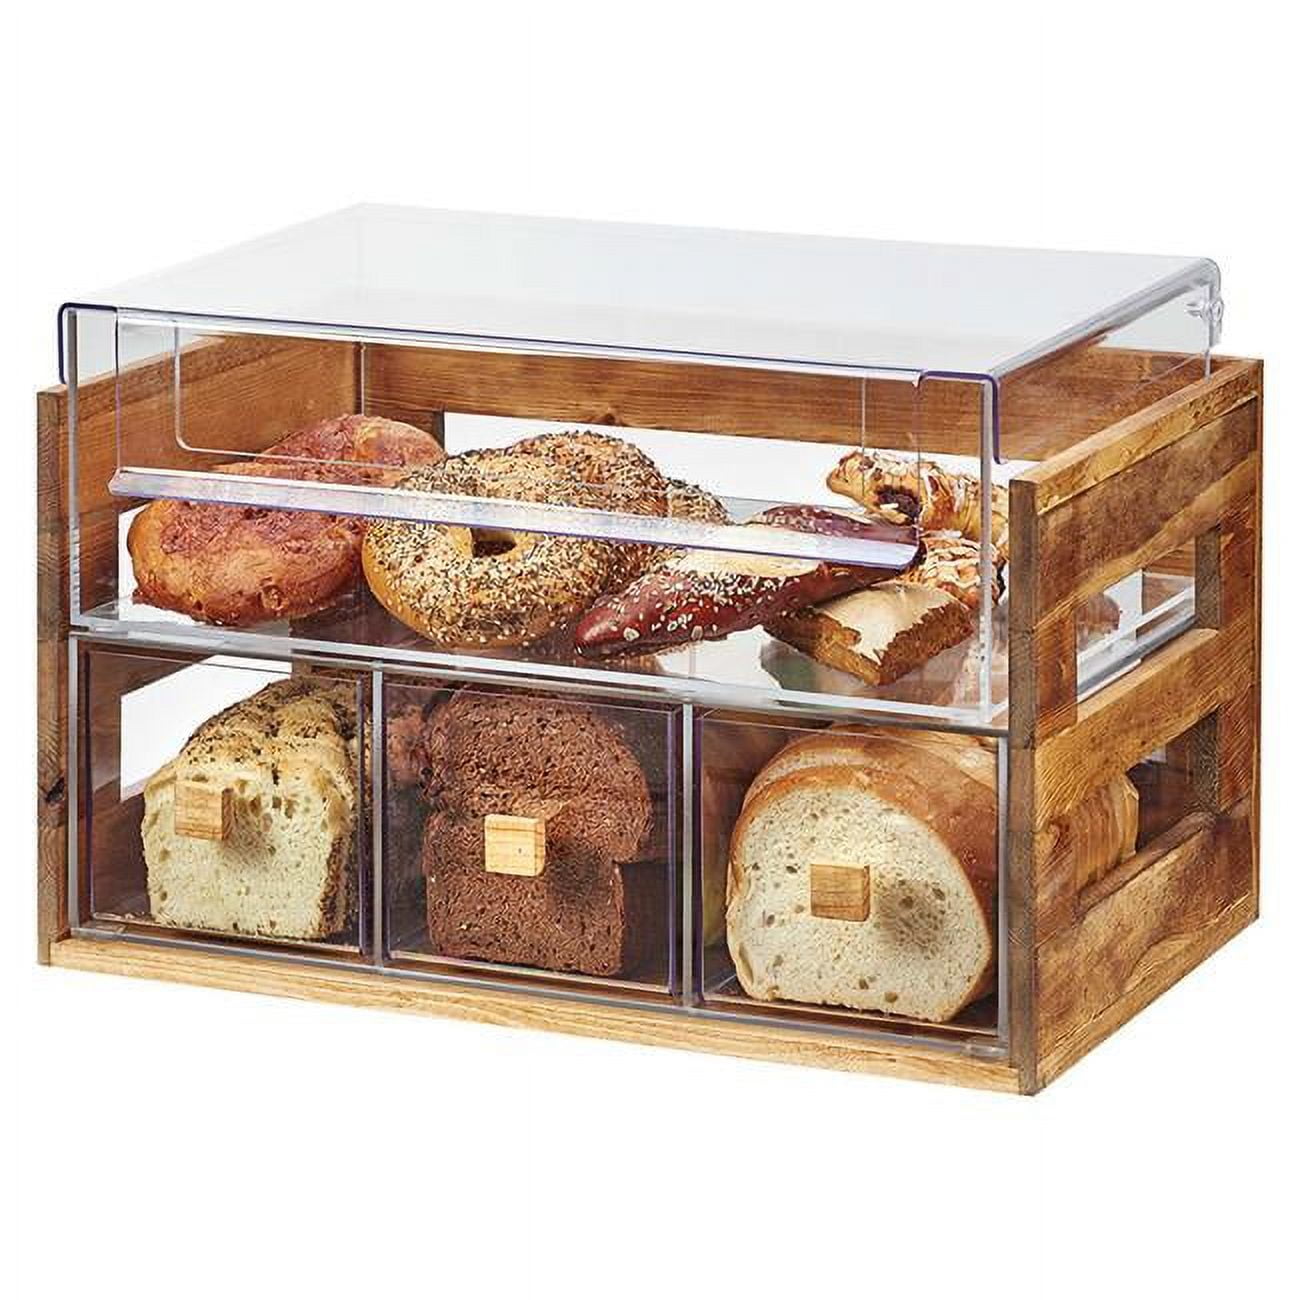 3624-99 Madera Reclaimed Wood 2 Tier Bread Display Case - 20.125 X 12.75 X 13.125 In.